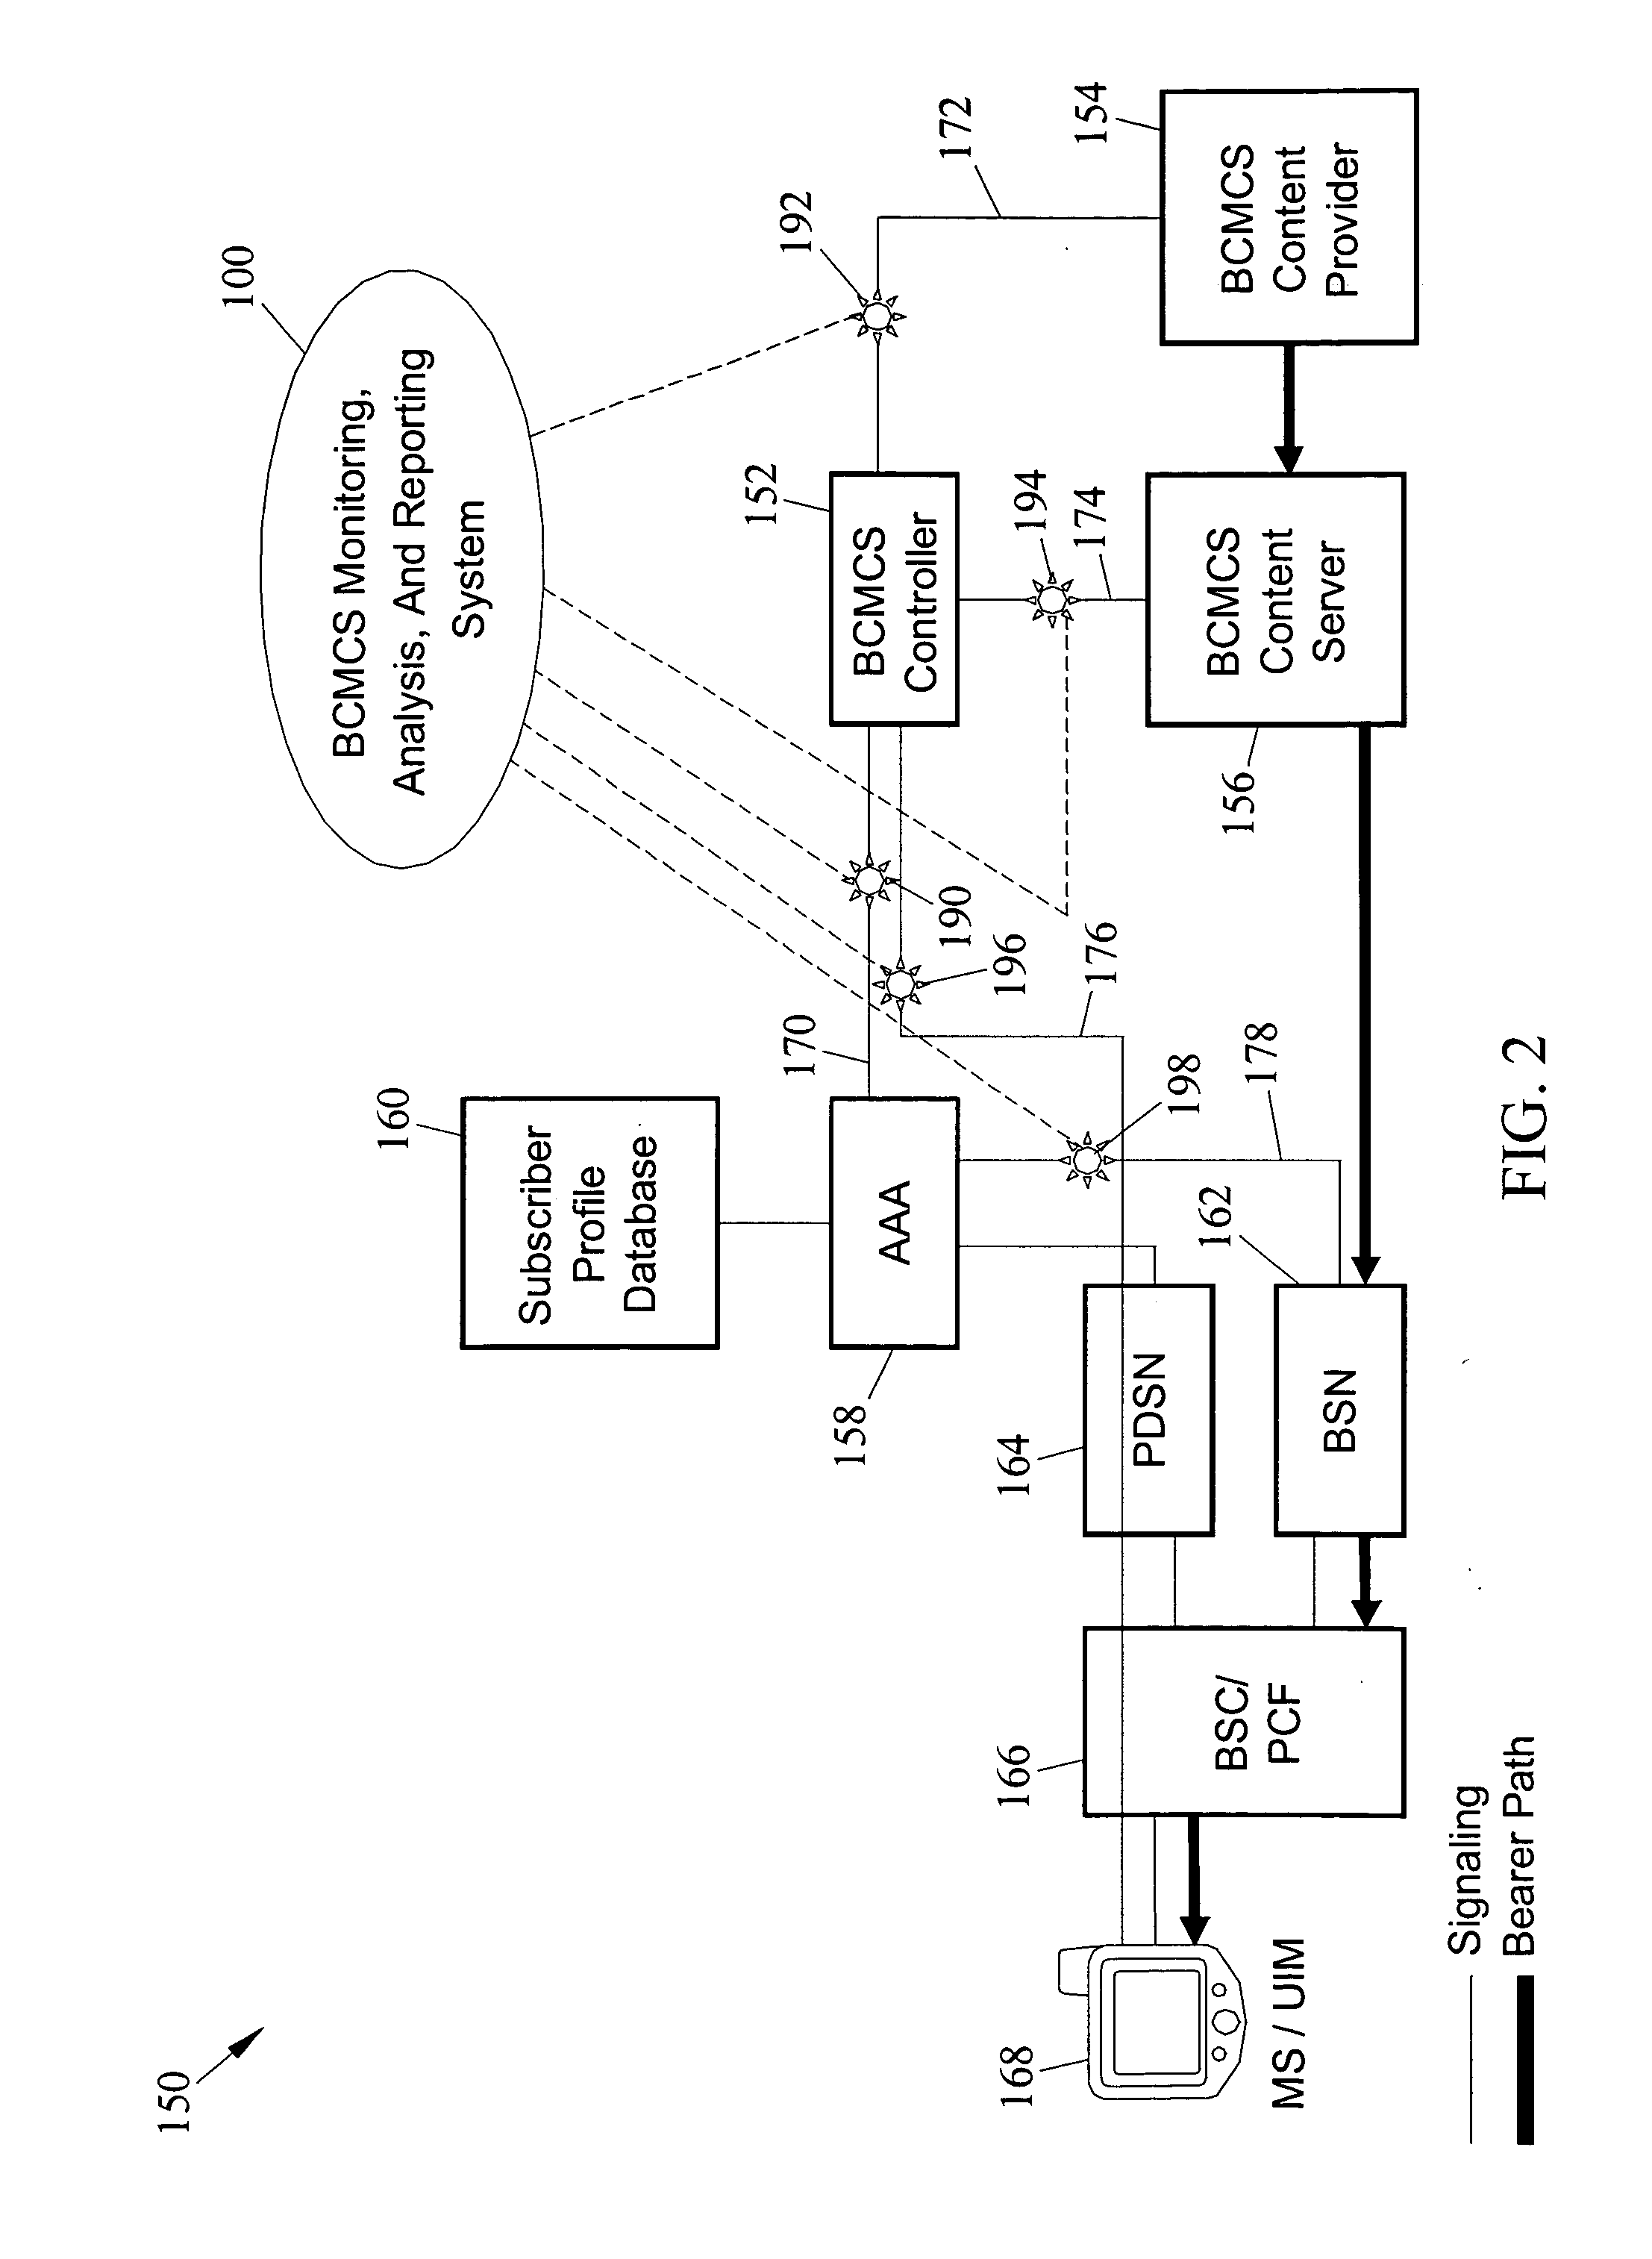 Methods, systems, and computer program products for monitoring and analyzing signaling messages associated with delivery of streaming media content to subscribers via a broadcast and multicast service (BCMCS)